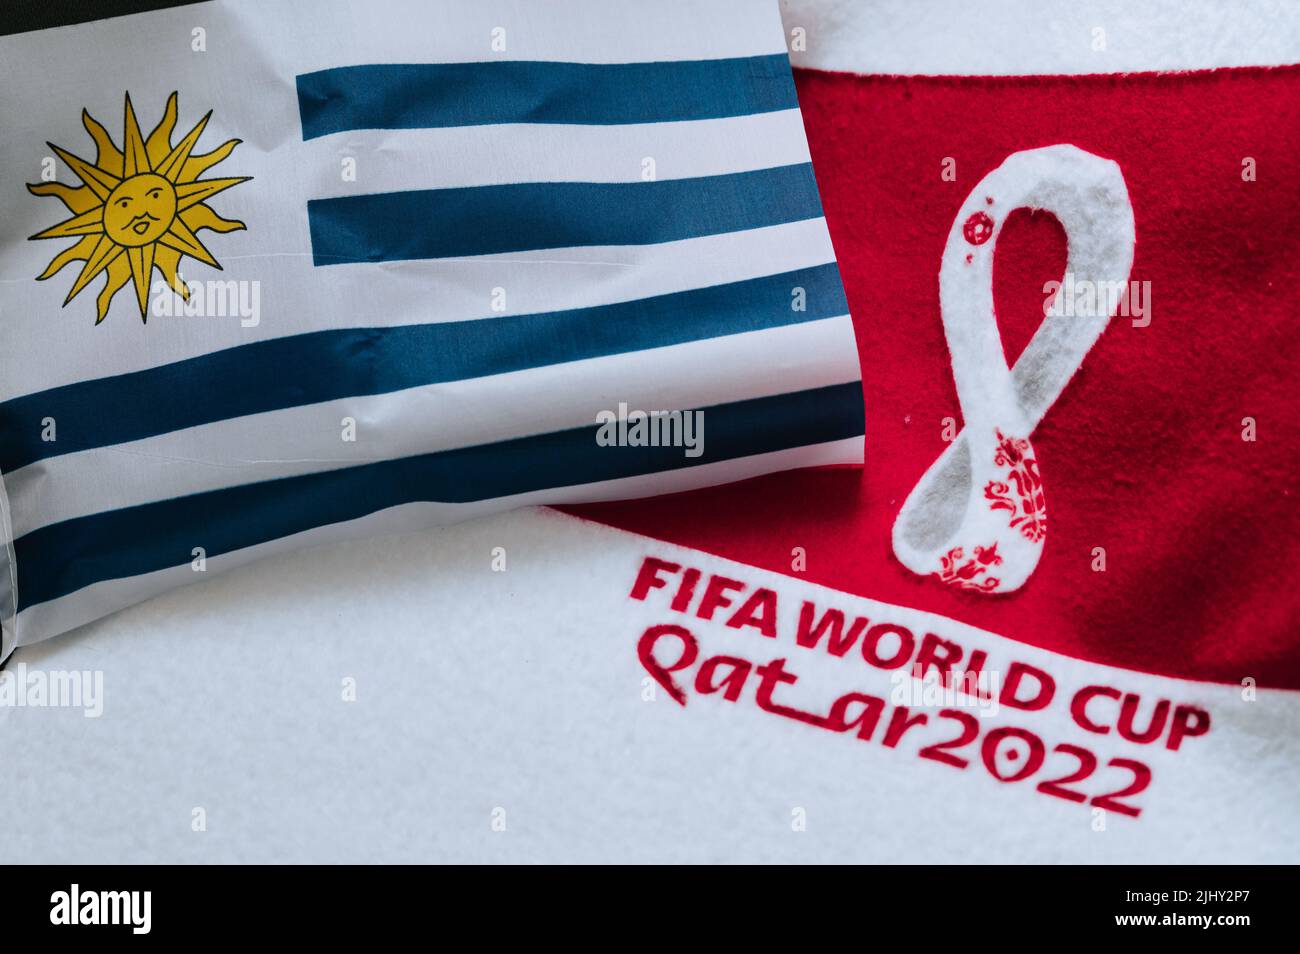 QATAR, DOHA, 18 JULY, 2022: Uruguay National flag and logo of FIFA World Cup in Qatar 2022 on red carpet. Soccer sport background, edit space. Qatar 2 Stock Photo